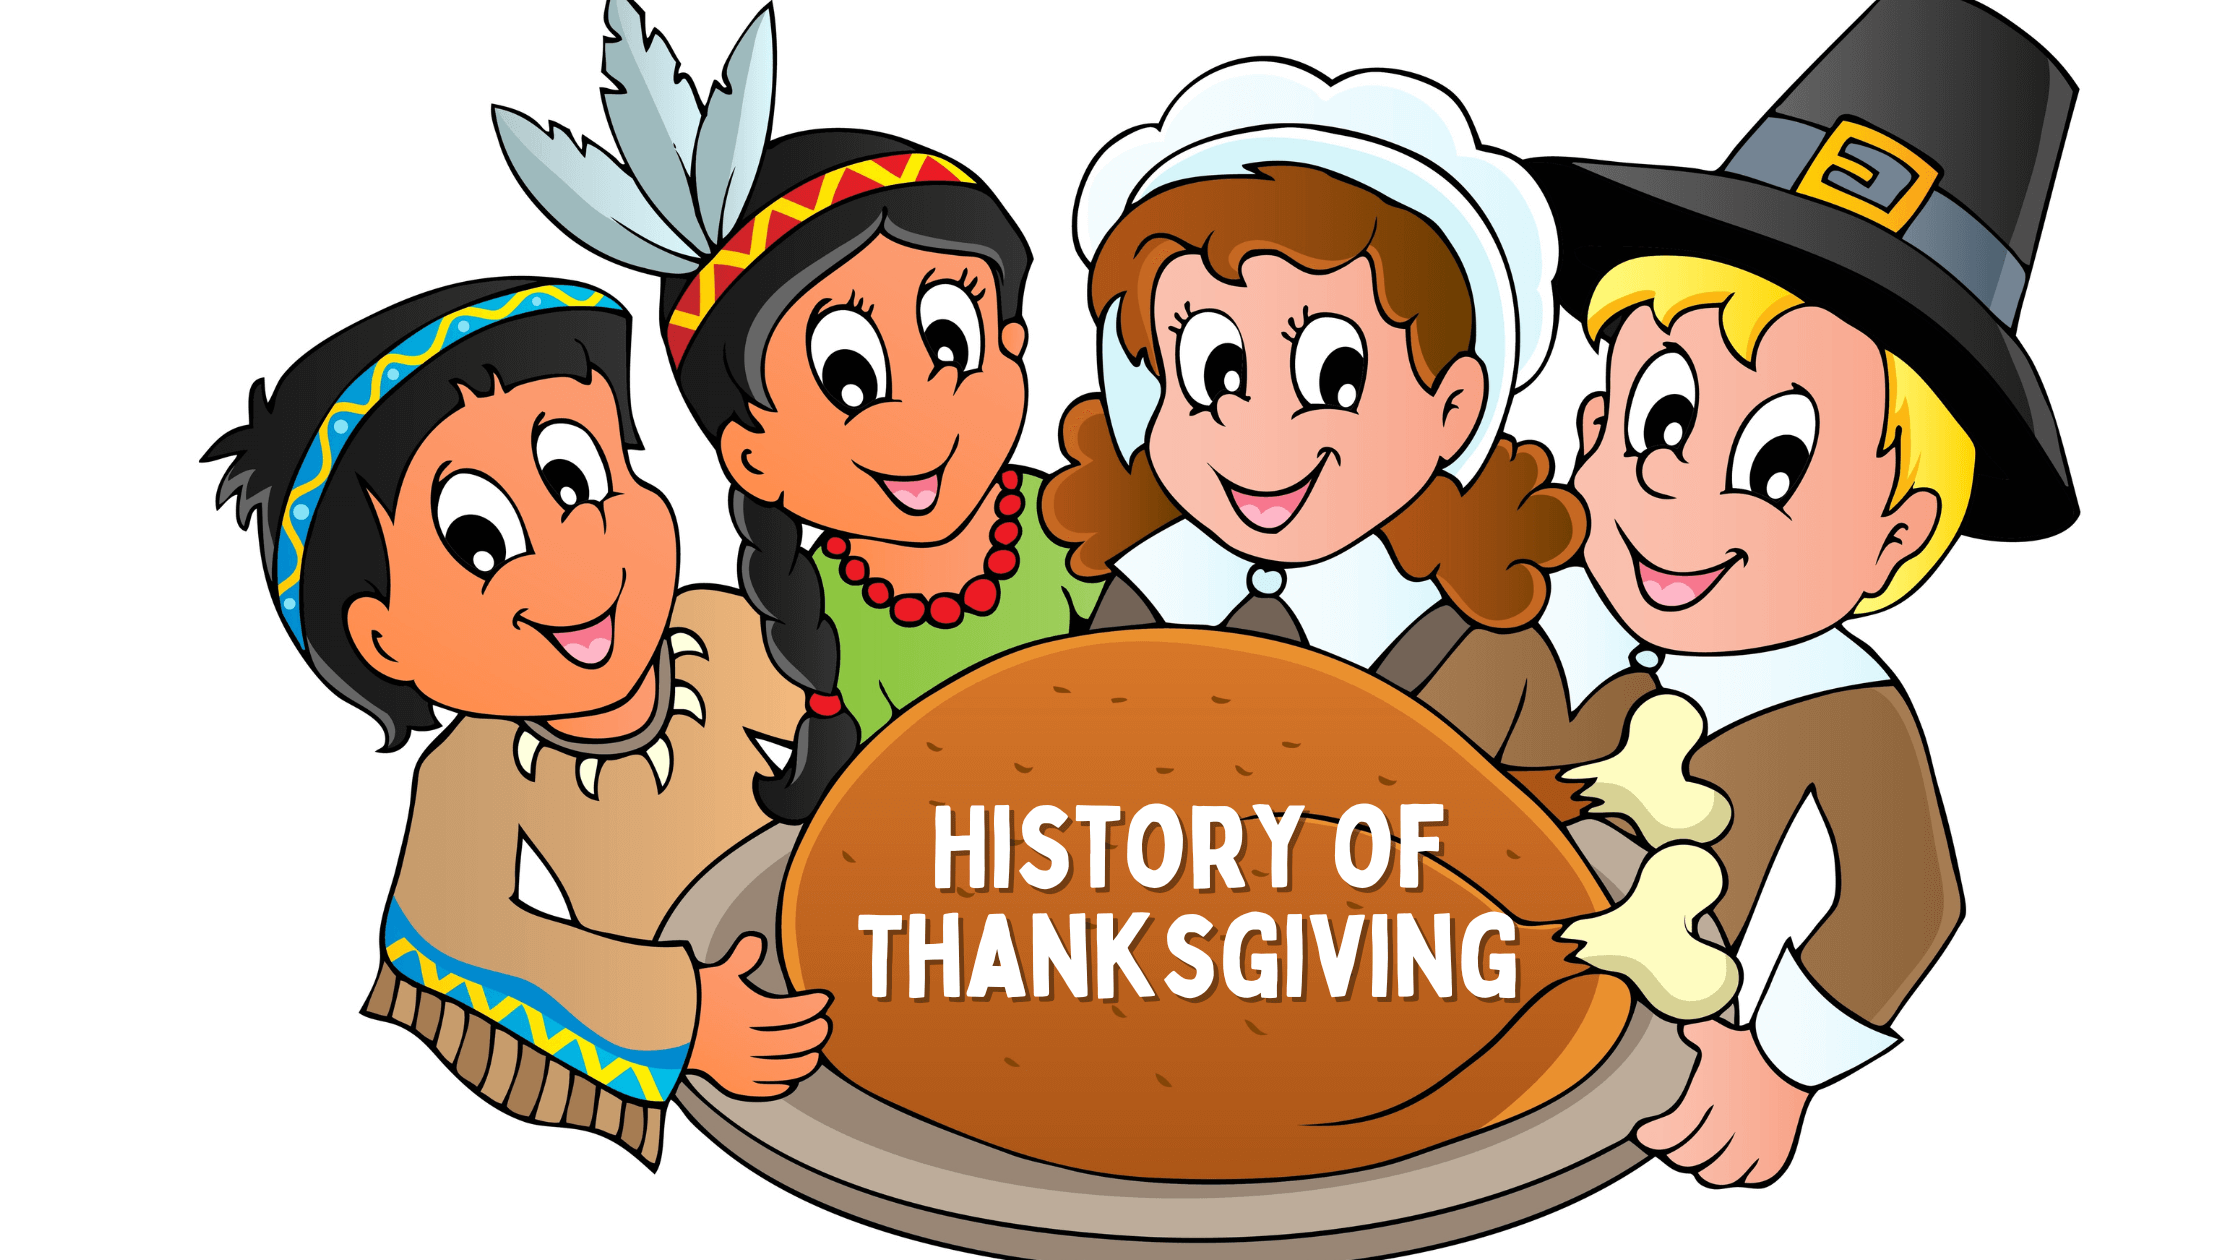 8 Wholesome Books about the History of Thanksgiving - Children's Books - Big Sky Life Books